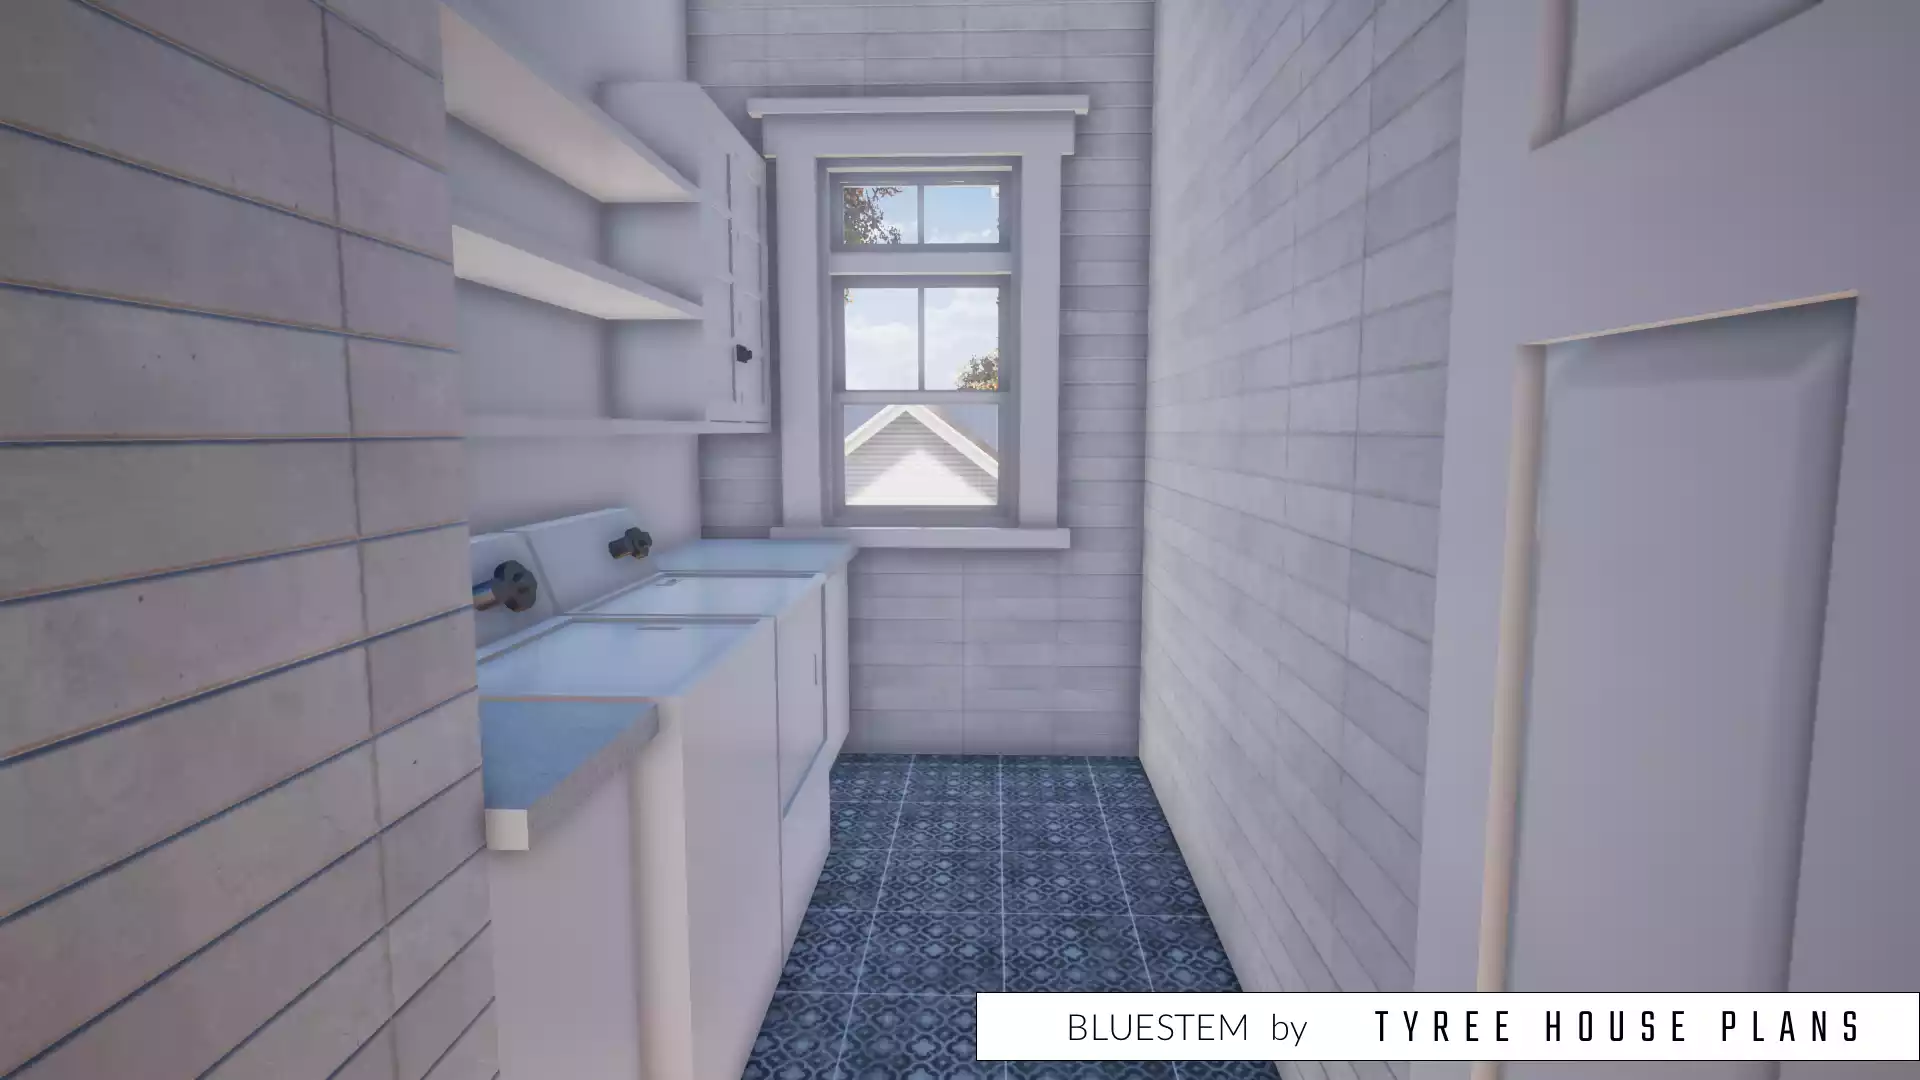 Laundry room with window. Bluestem by Tyree House Plans.